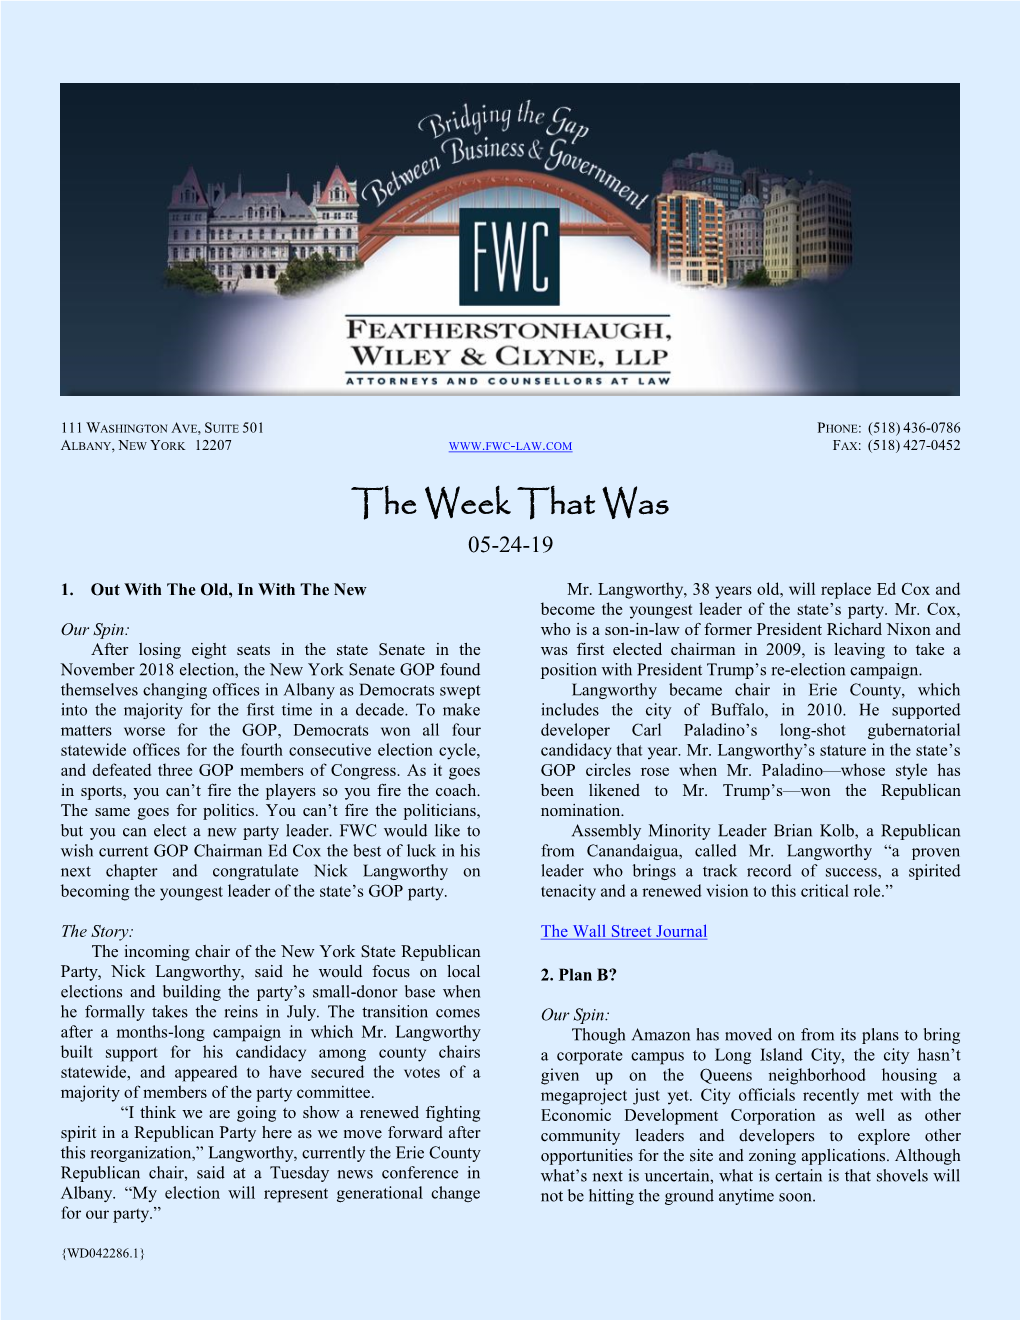 The Week That Was 05/24/19 (WD042734.DOC;1)